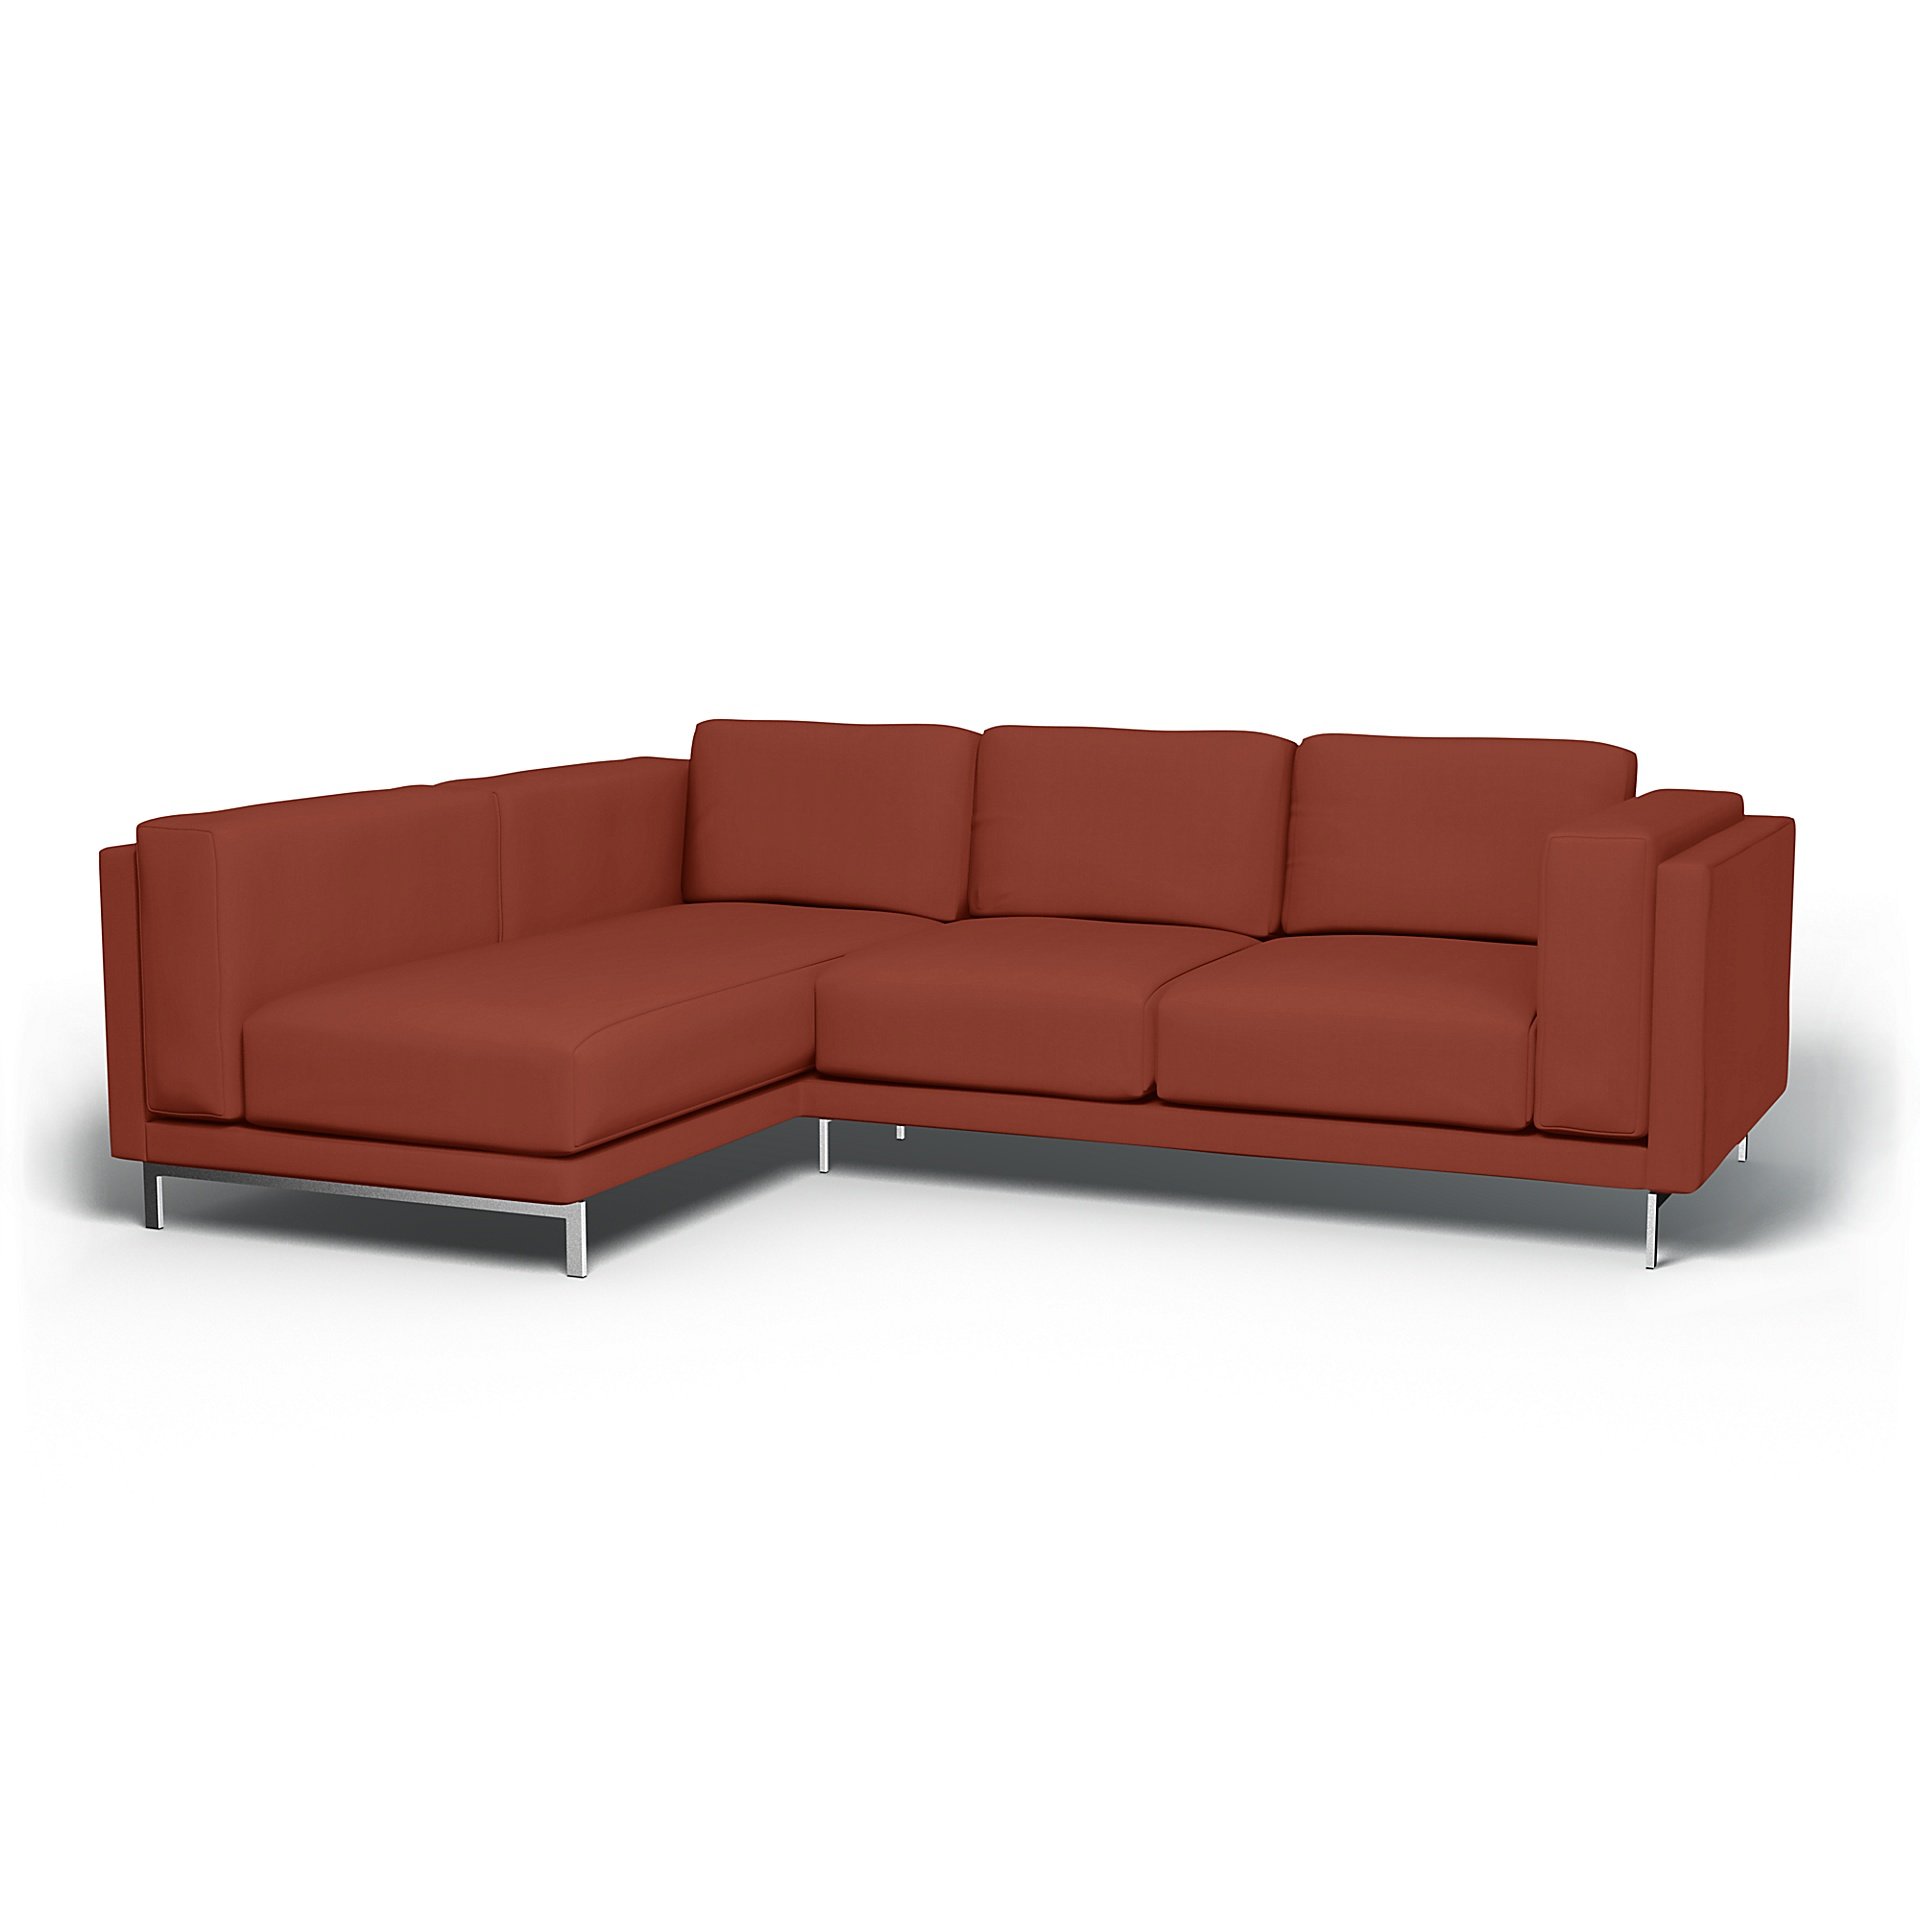 IKEA - Nockeby 3 Seater Sofa with Left Chaise Cover, Burnt Orange, Cotton - Bemz